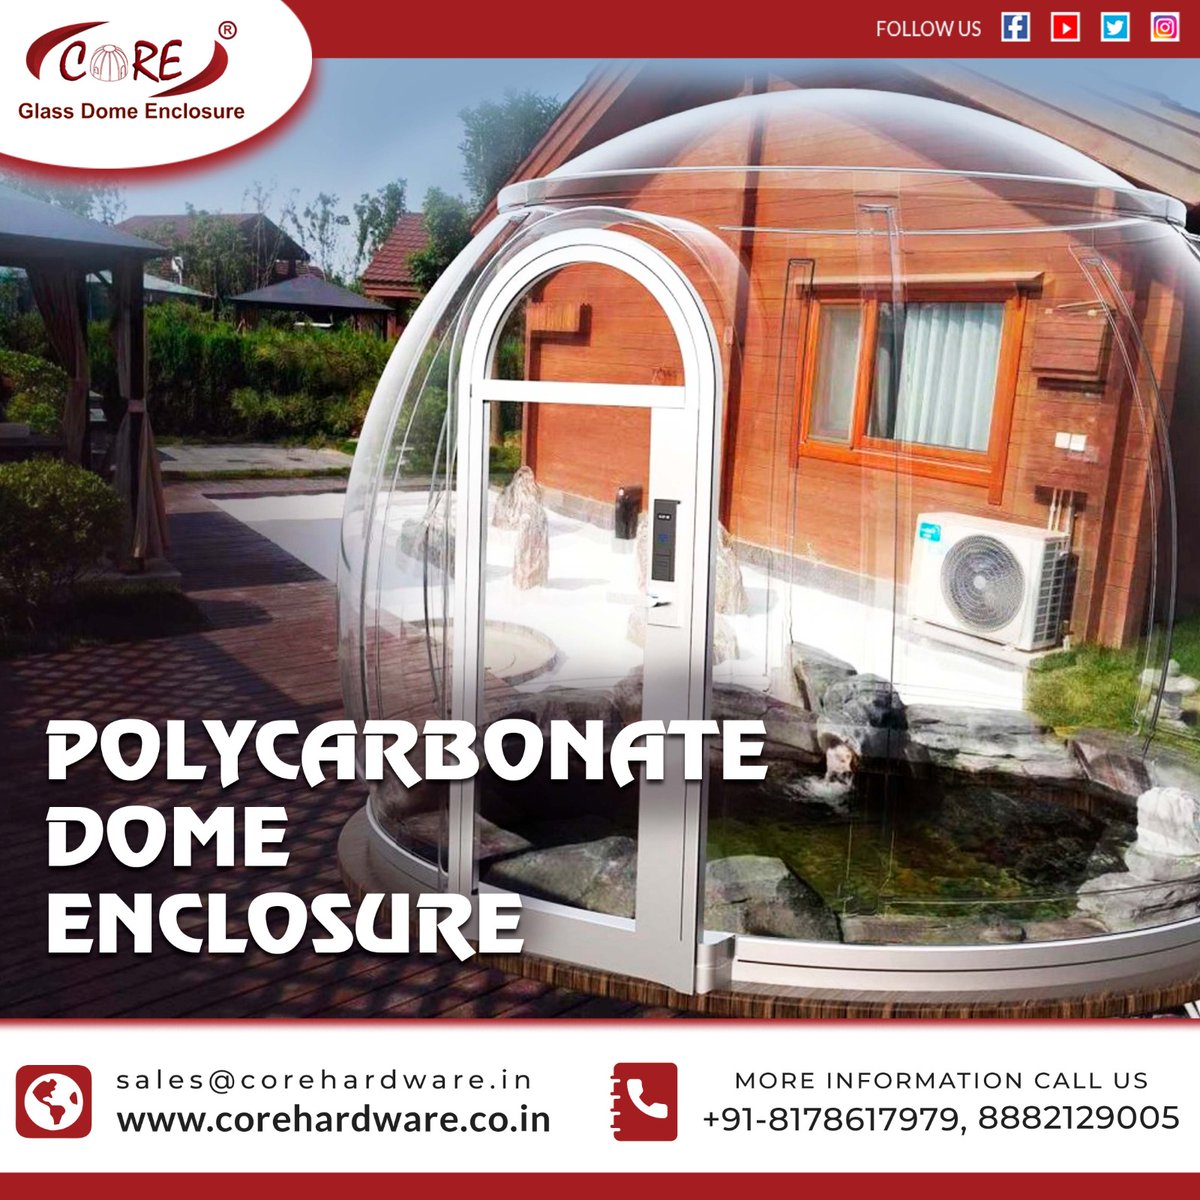 Get an exclusive experience of comfort and security by welcoming Core's Polycarbonate Dome Enclosures to fill-up your empty space with grace and perfection!

Call now: callon.click/9211106665

#GlassDome #OpenableDome #ModernInteriors #HomeDecor #coreglassdome #corehardware